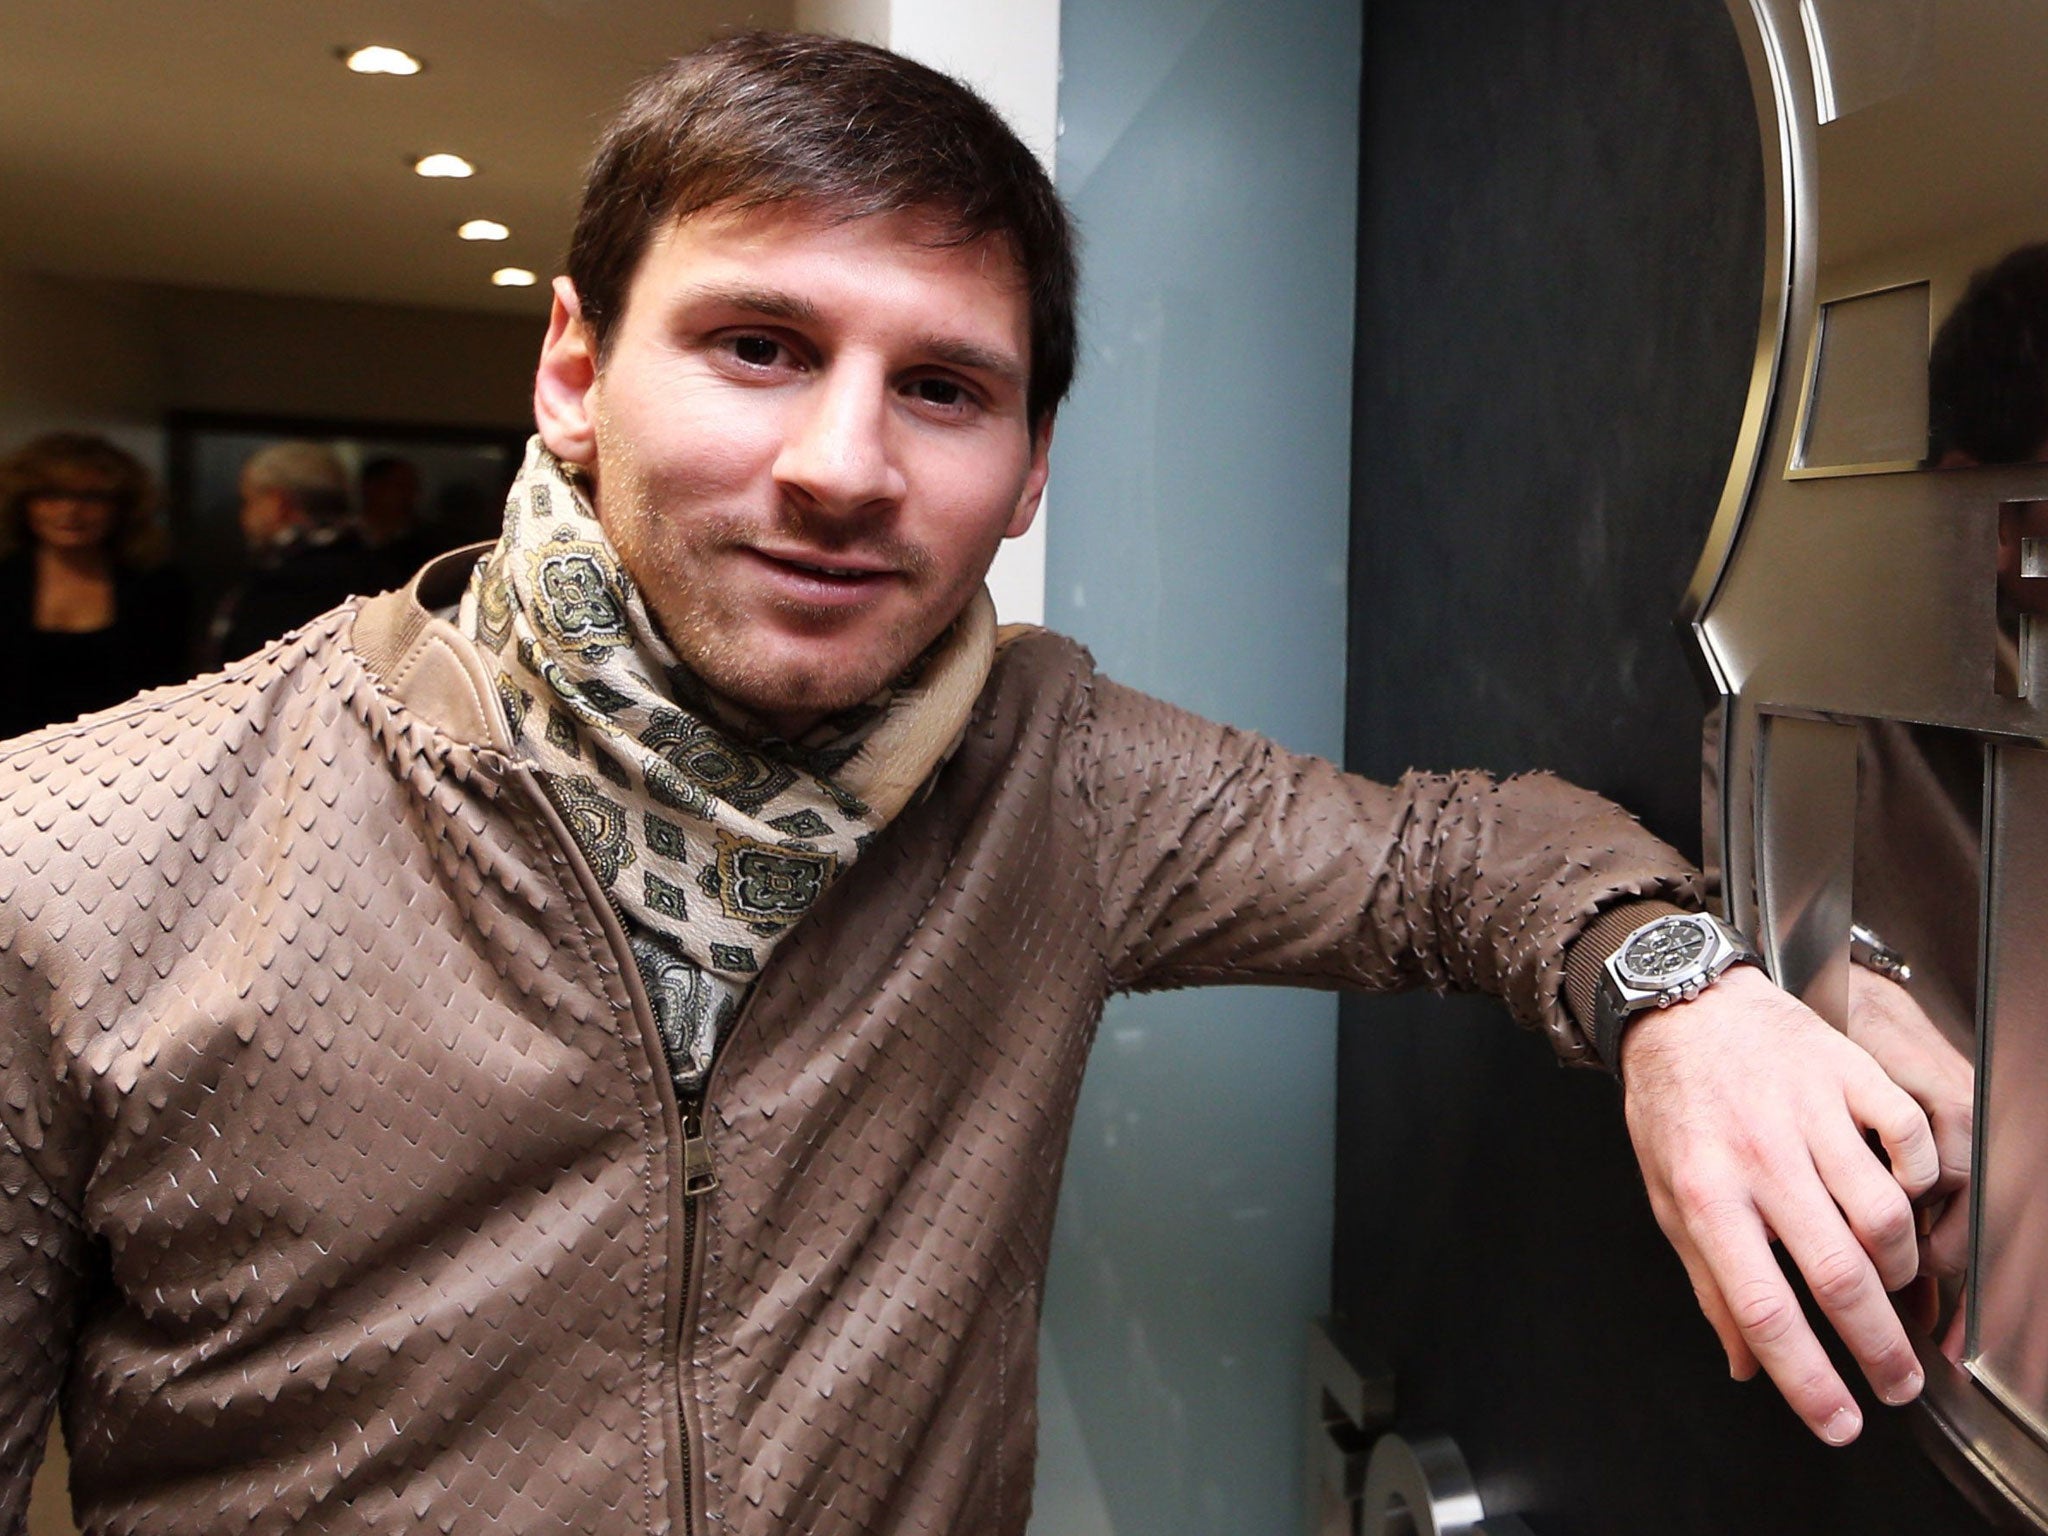 Lionel Messi has signed a new contract with Barcelona